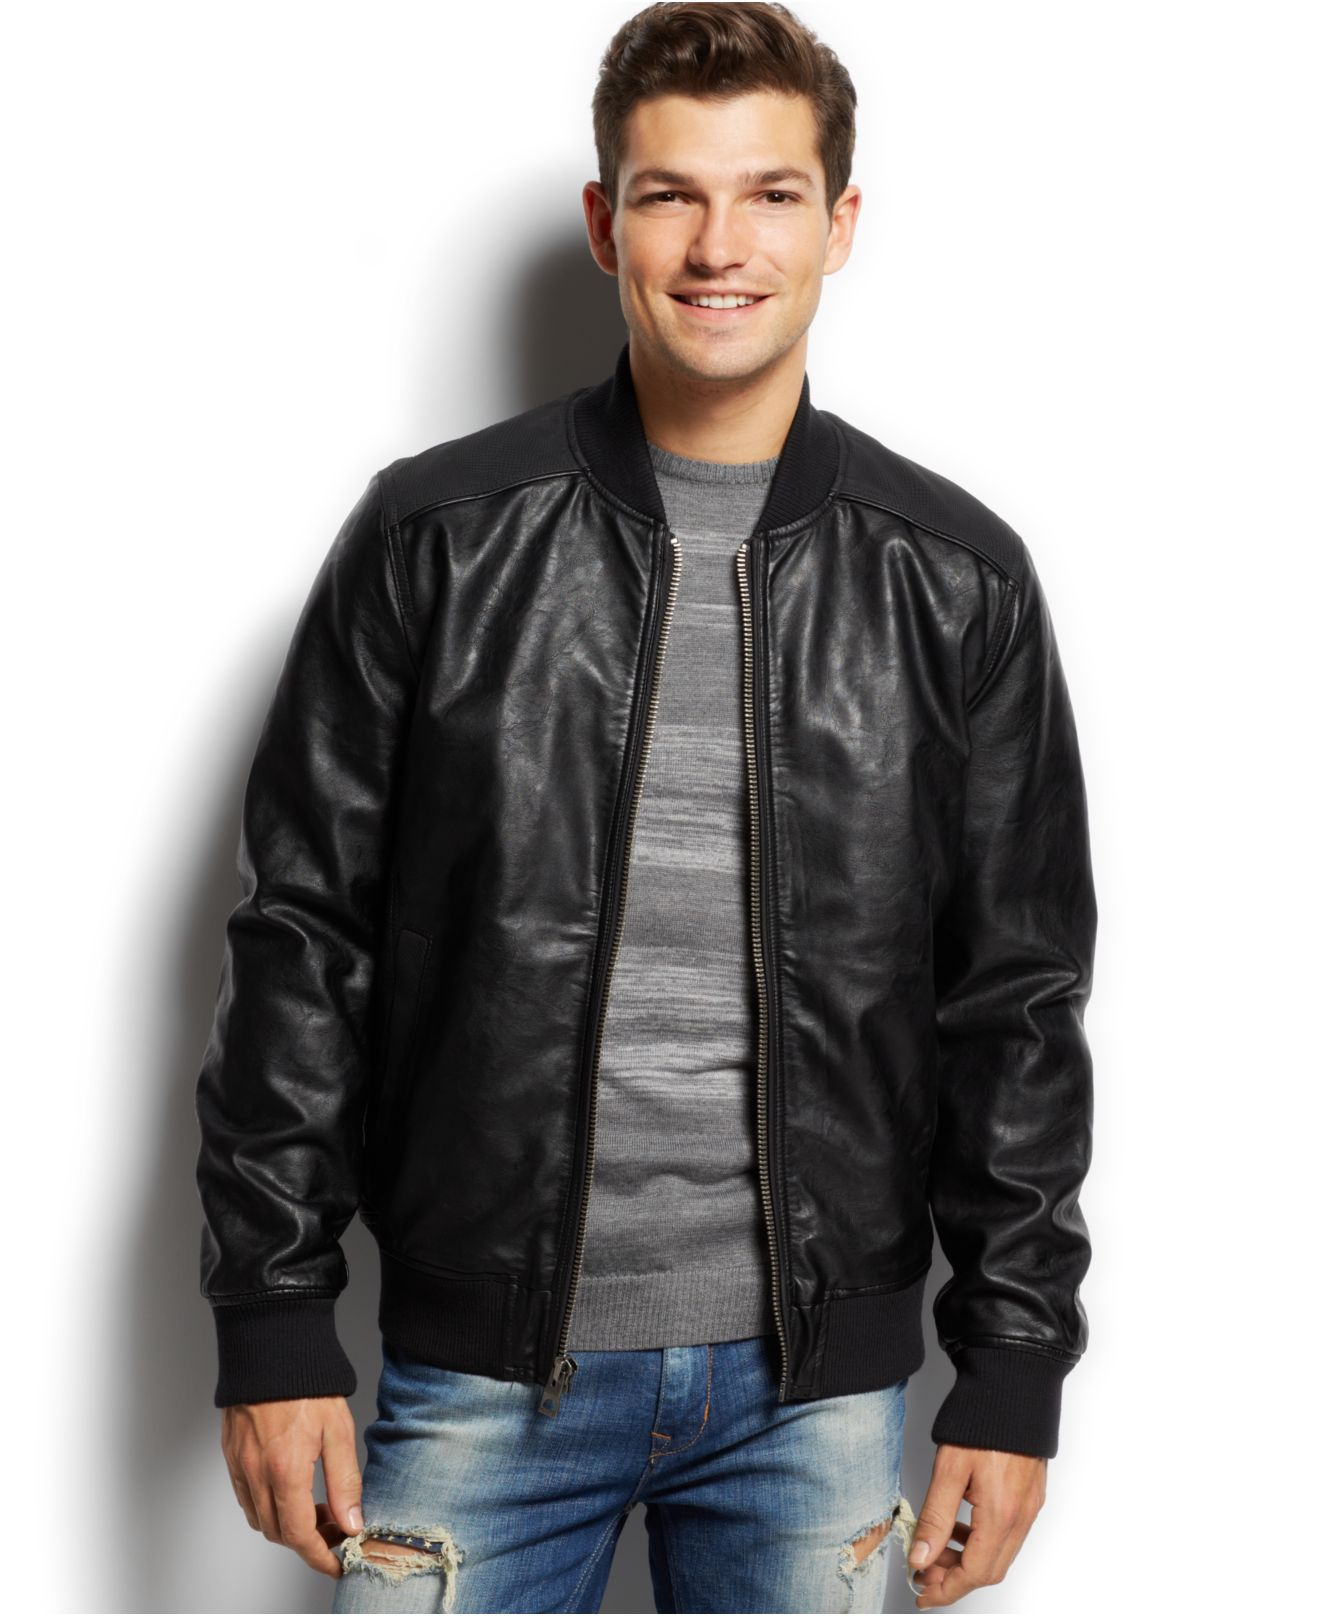 Guess Faux-Leather Bomber Jacket in Black for Men - Lyst